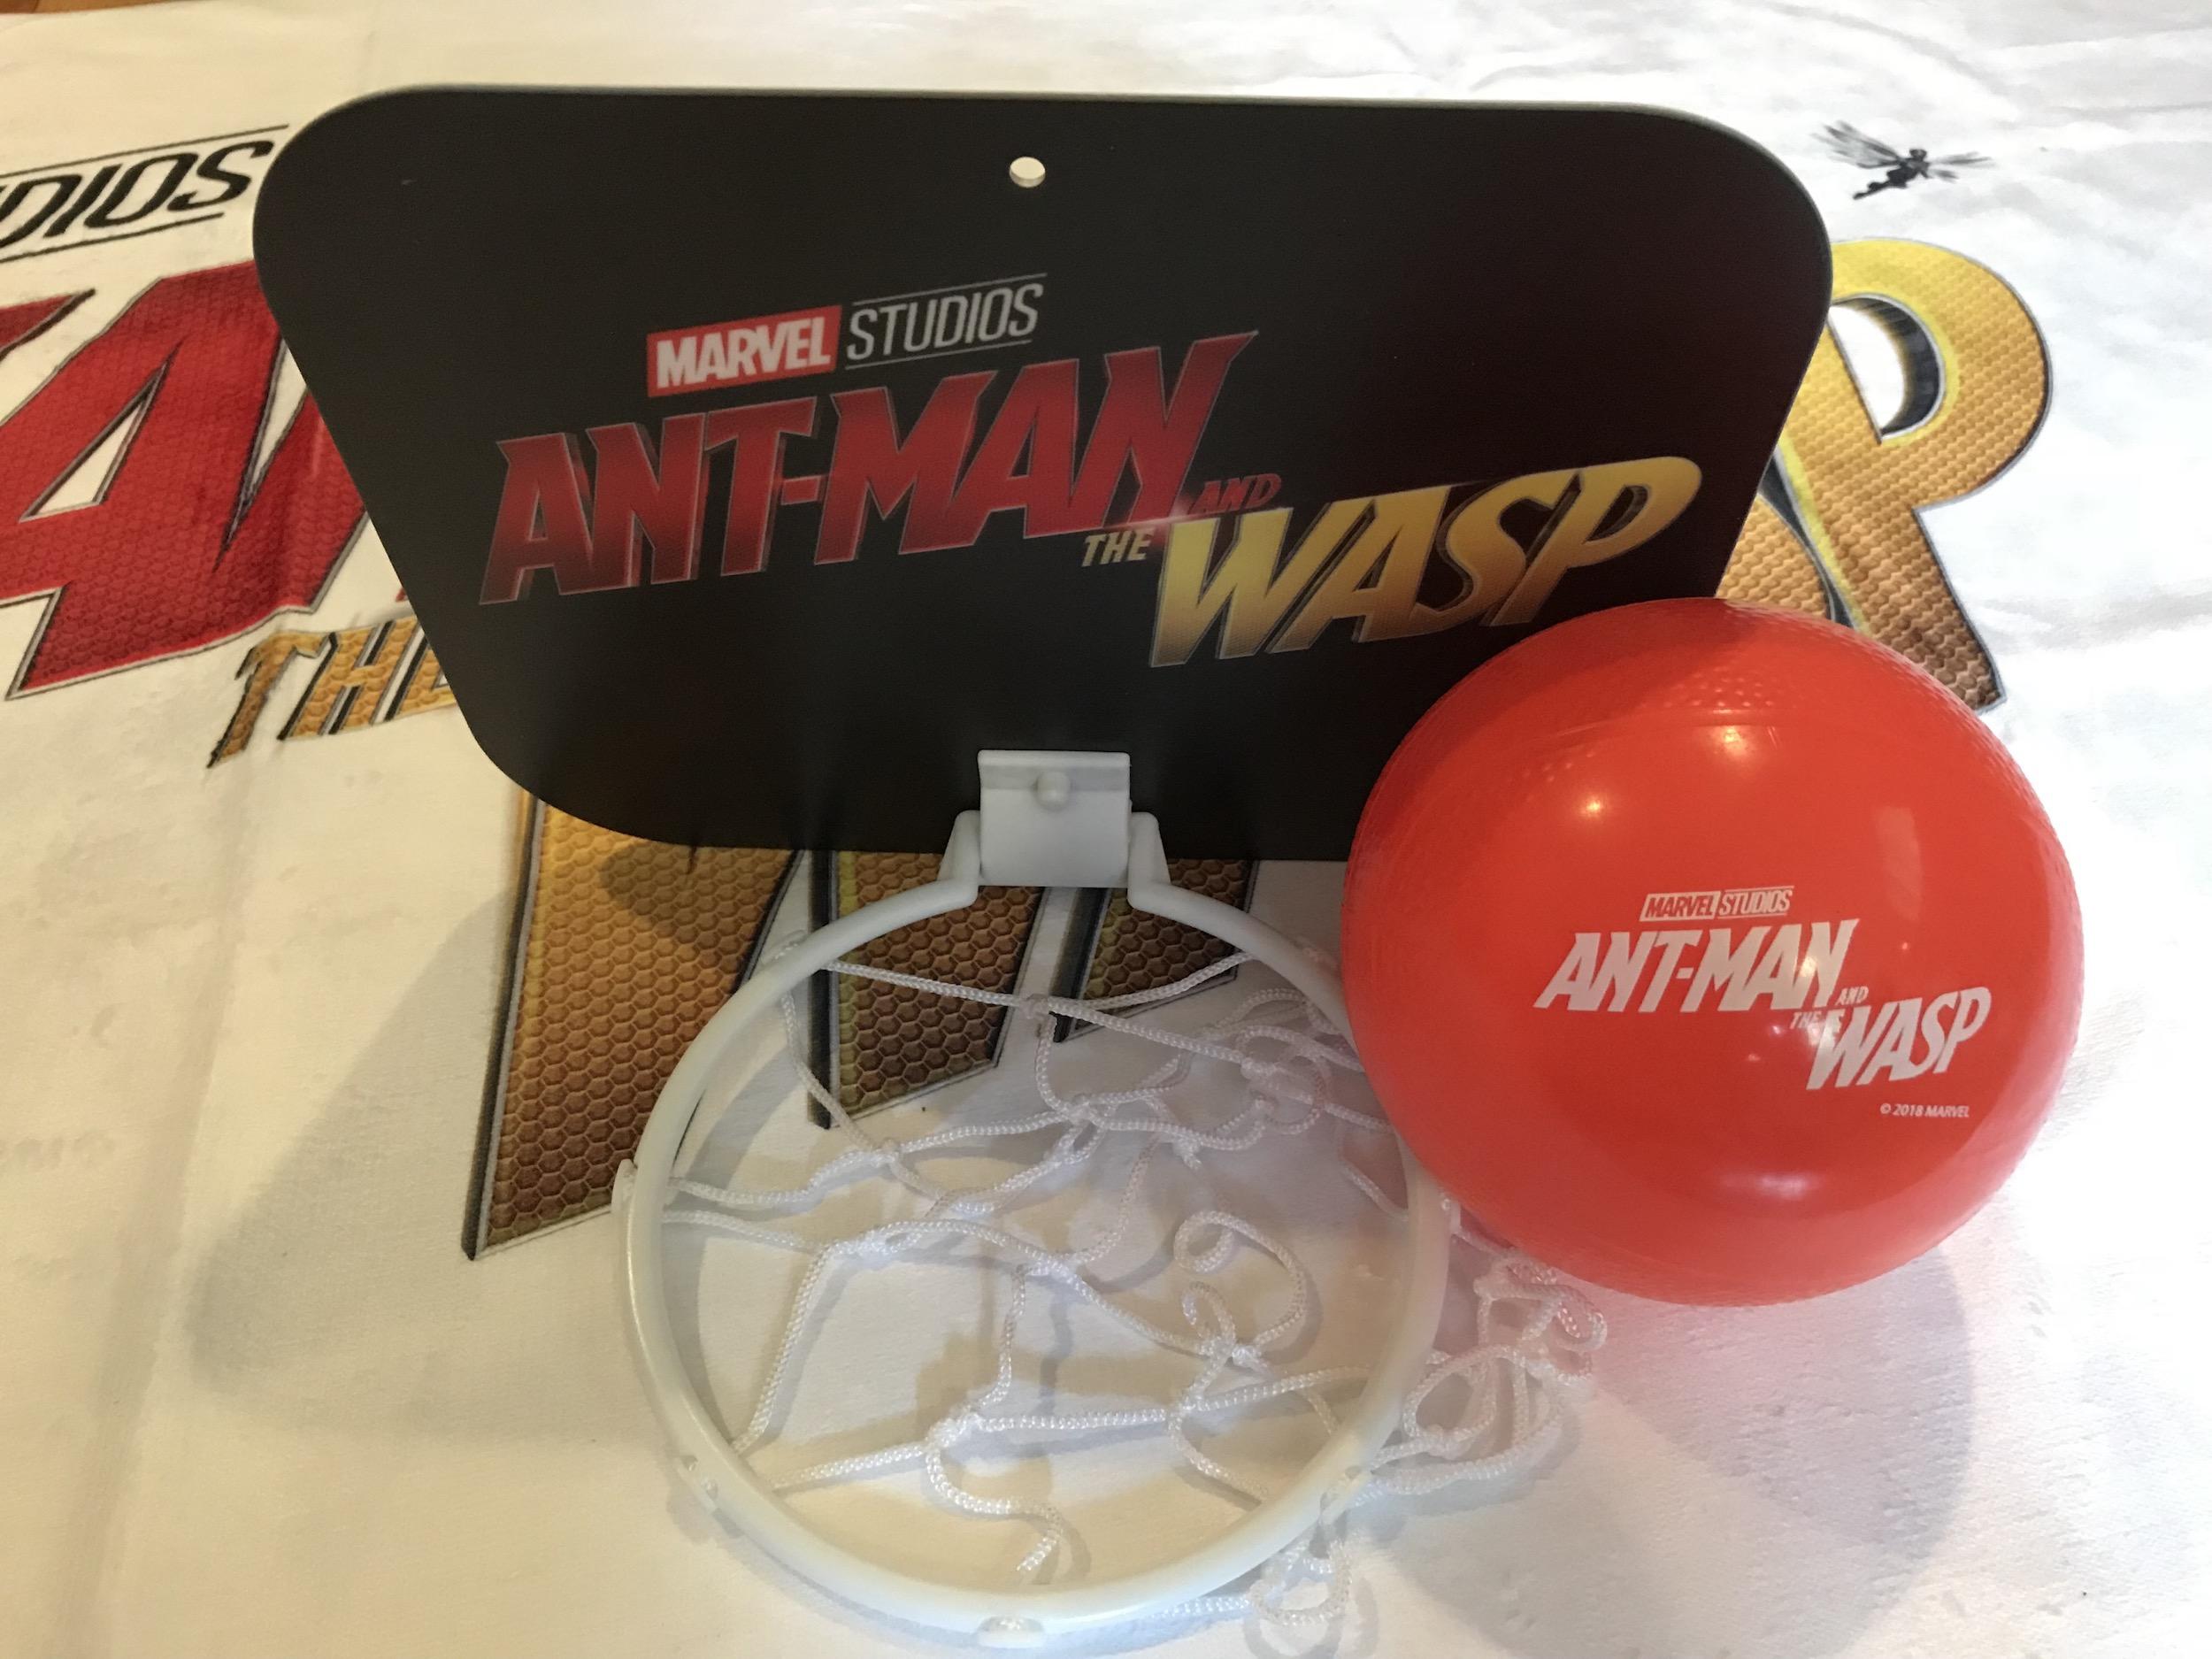  I loved Ant-Man. Such a hugely emotional story packed into a teeny tiny character. So when Ant-Man and the Wasp came out, I was blown away at twice the action, twice the teeny tiny superheroes and twice the shockers!  If you haven't seen Ant-Man and the Wasp yet... shut the door! No, really. Go shut the door then sit on your couch and start streaming it because that bad boy is available now on digital download! And on October 16, you can take Ant-Man and the Wasp home as a super spiffy Blu-ray.  Without giving too much away, the film sees our hero Scott Lang stuck at home. Following the amazingly awesome events of Captain America: Civil War, our bugtastic hero found himself arrested. Thankfully, Scott Lang (Ant-Man) doesn't have to continue doing time on The Raft (a floating prison). Instead, he's stuck serving house arrest. On the plus side, he gets to spend some quality and creative time with his daughter Cassie.  Those folks over at Marvel thought it'd be fun for some of us bloggers to take on the role of Scott Lang and spend a Fun-At-Home Day In with our kids. Here's what they suggested: To help out, I was sent this crazy mystery box! What, pray tell, was inside it you may ask? Go ahead. Ask.  Yeeehah that's a lot of fun, cool Ant-Man and the Wasp loot! Specifically, we're talking about: Ant-Man and the Wasp Blu-ray Karaoke microphone (USB!) Deck of playing cards and a book of magic tricks Origami set Indoor bowling set Mini finger drum kit Indoor basketball hoop and basketball Bubble Bath set of a bath bomb and an Ant-Man and the Wasp towel #ANTMANANDTHEWASPBLURAY.